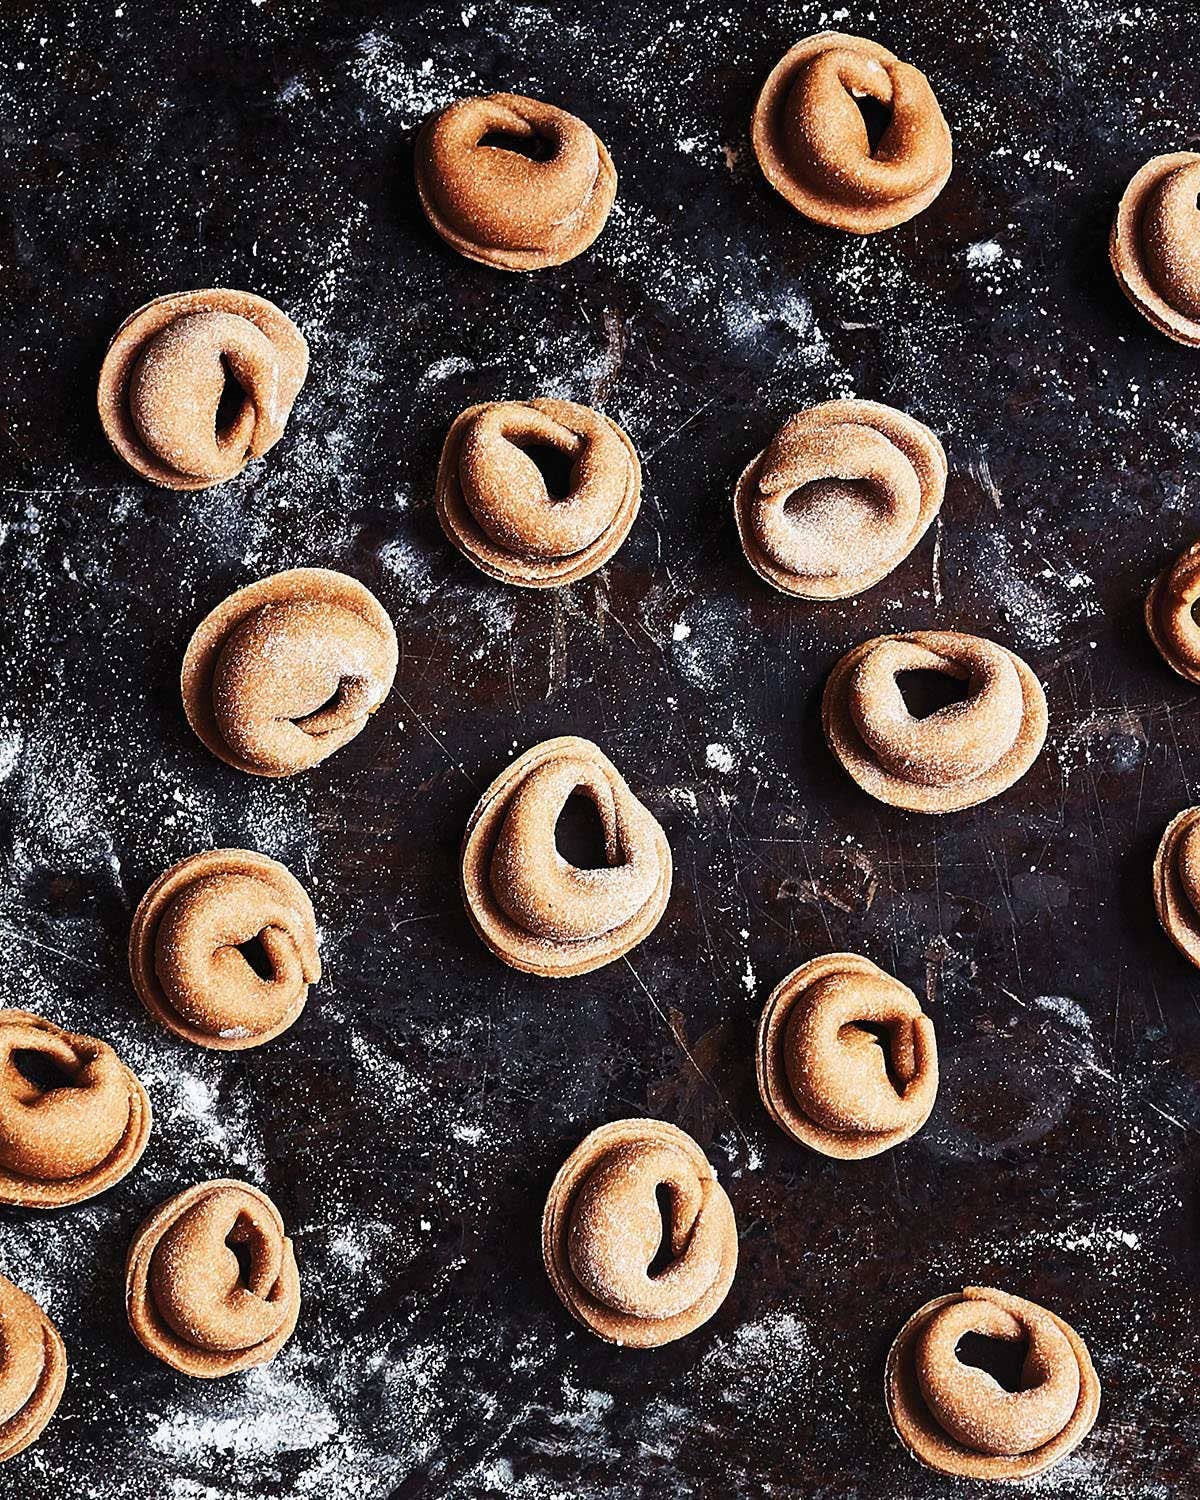 Why We’re Crazy About Chestnuts—and How to Cook With Them